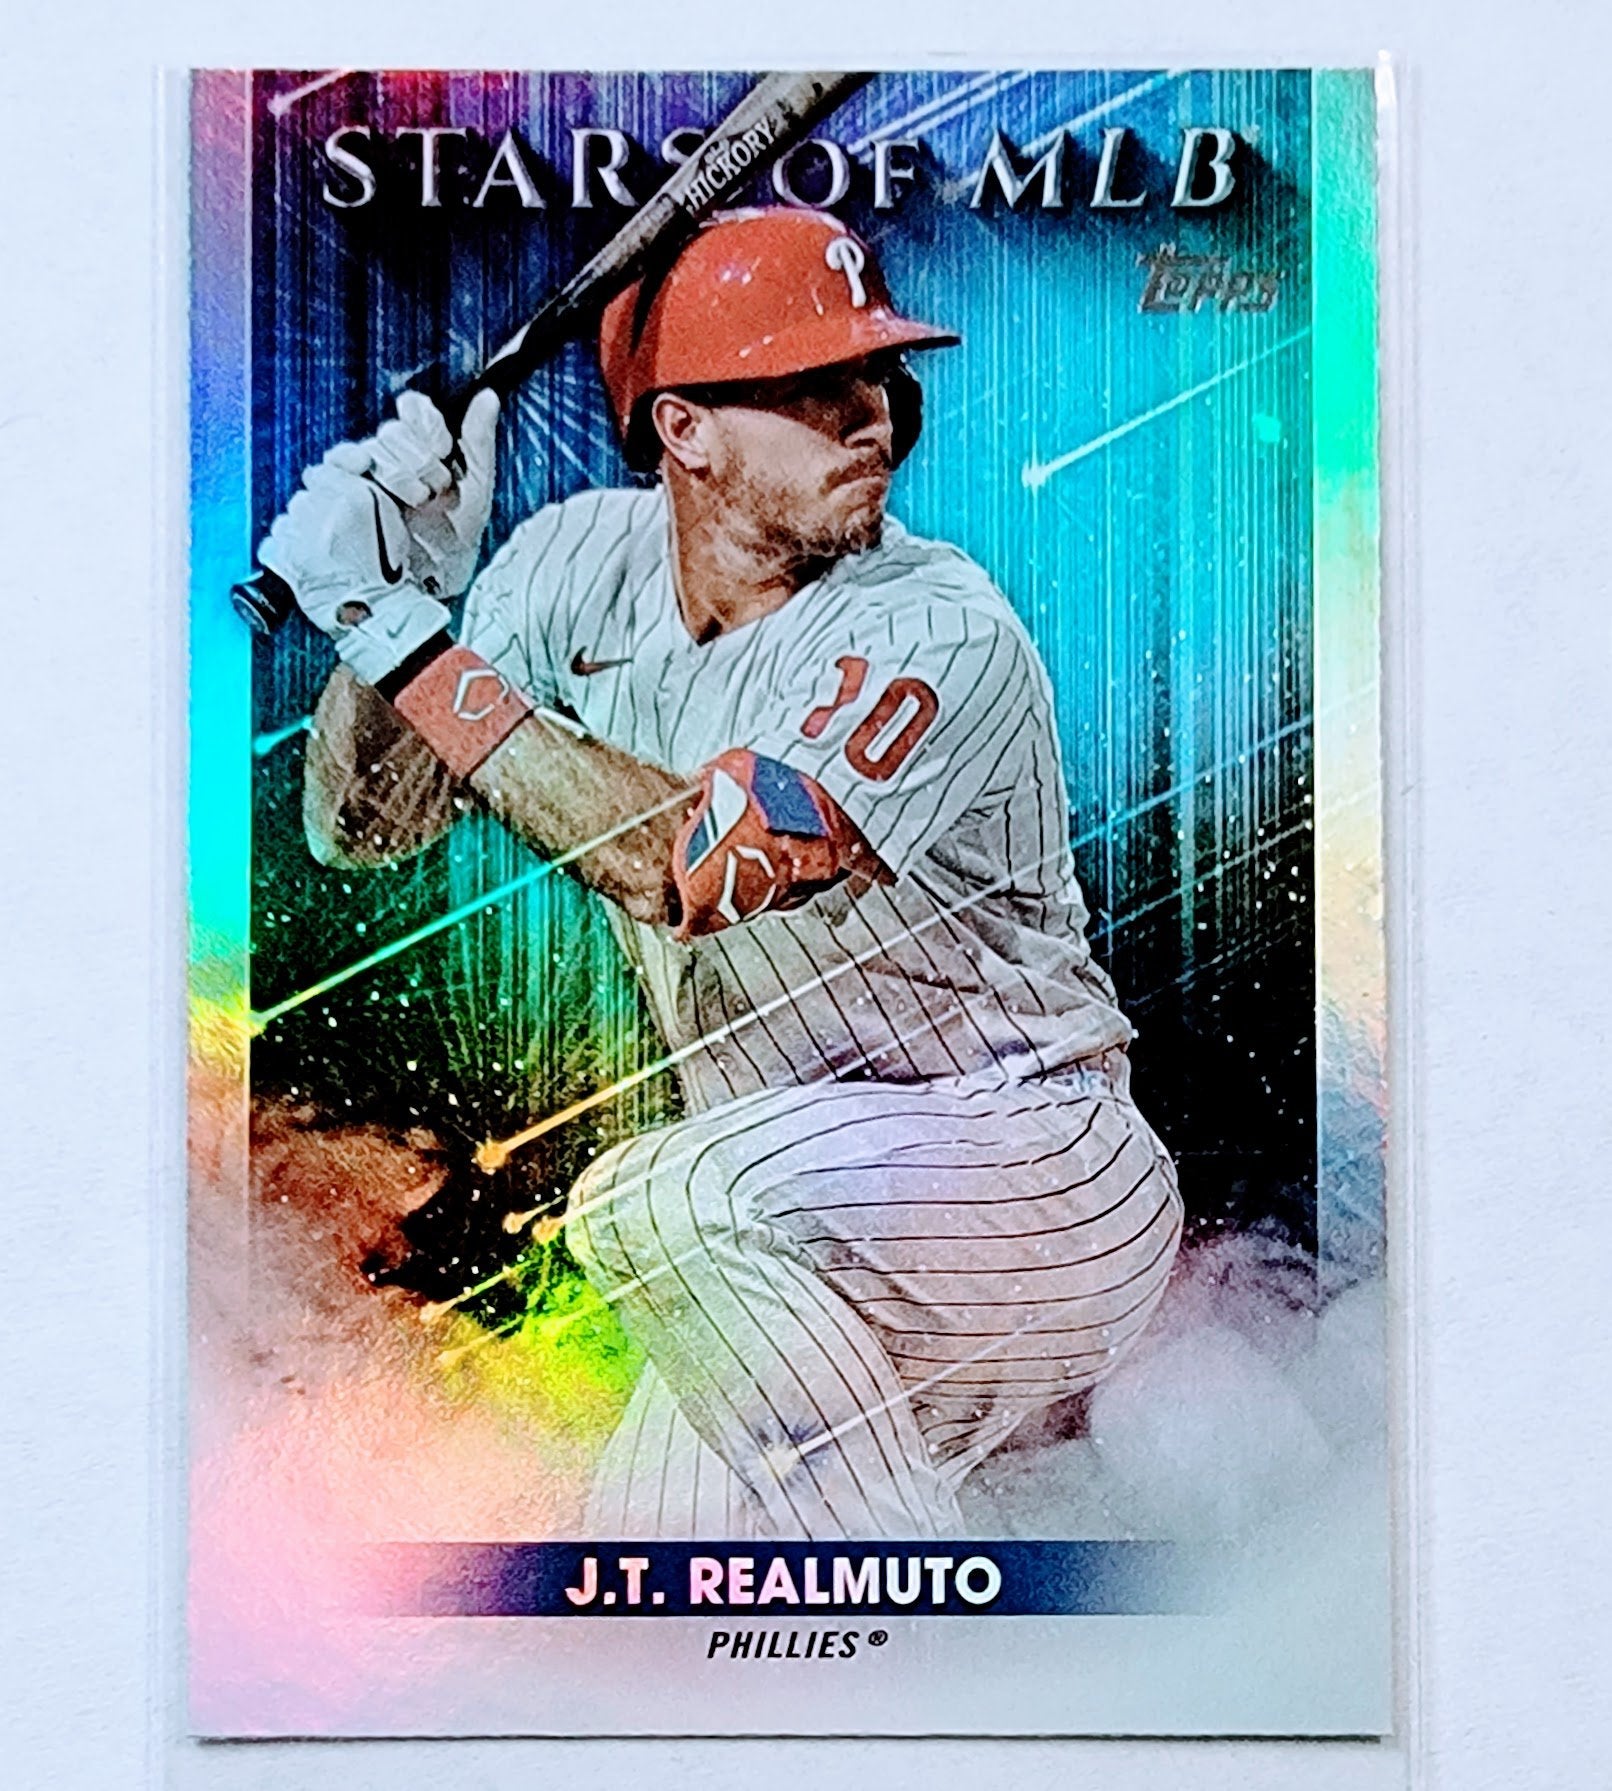 2022 Topps J.T. Realmuto Stars of the MLB Foil Refractor Baseball Card AVM1 simple Xclusive Collectibles   